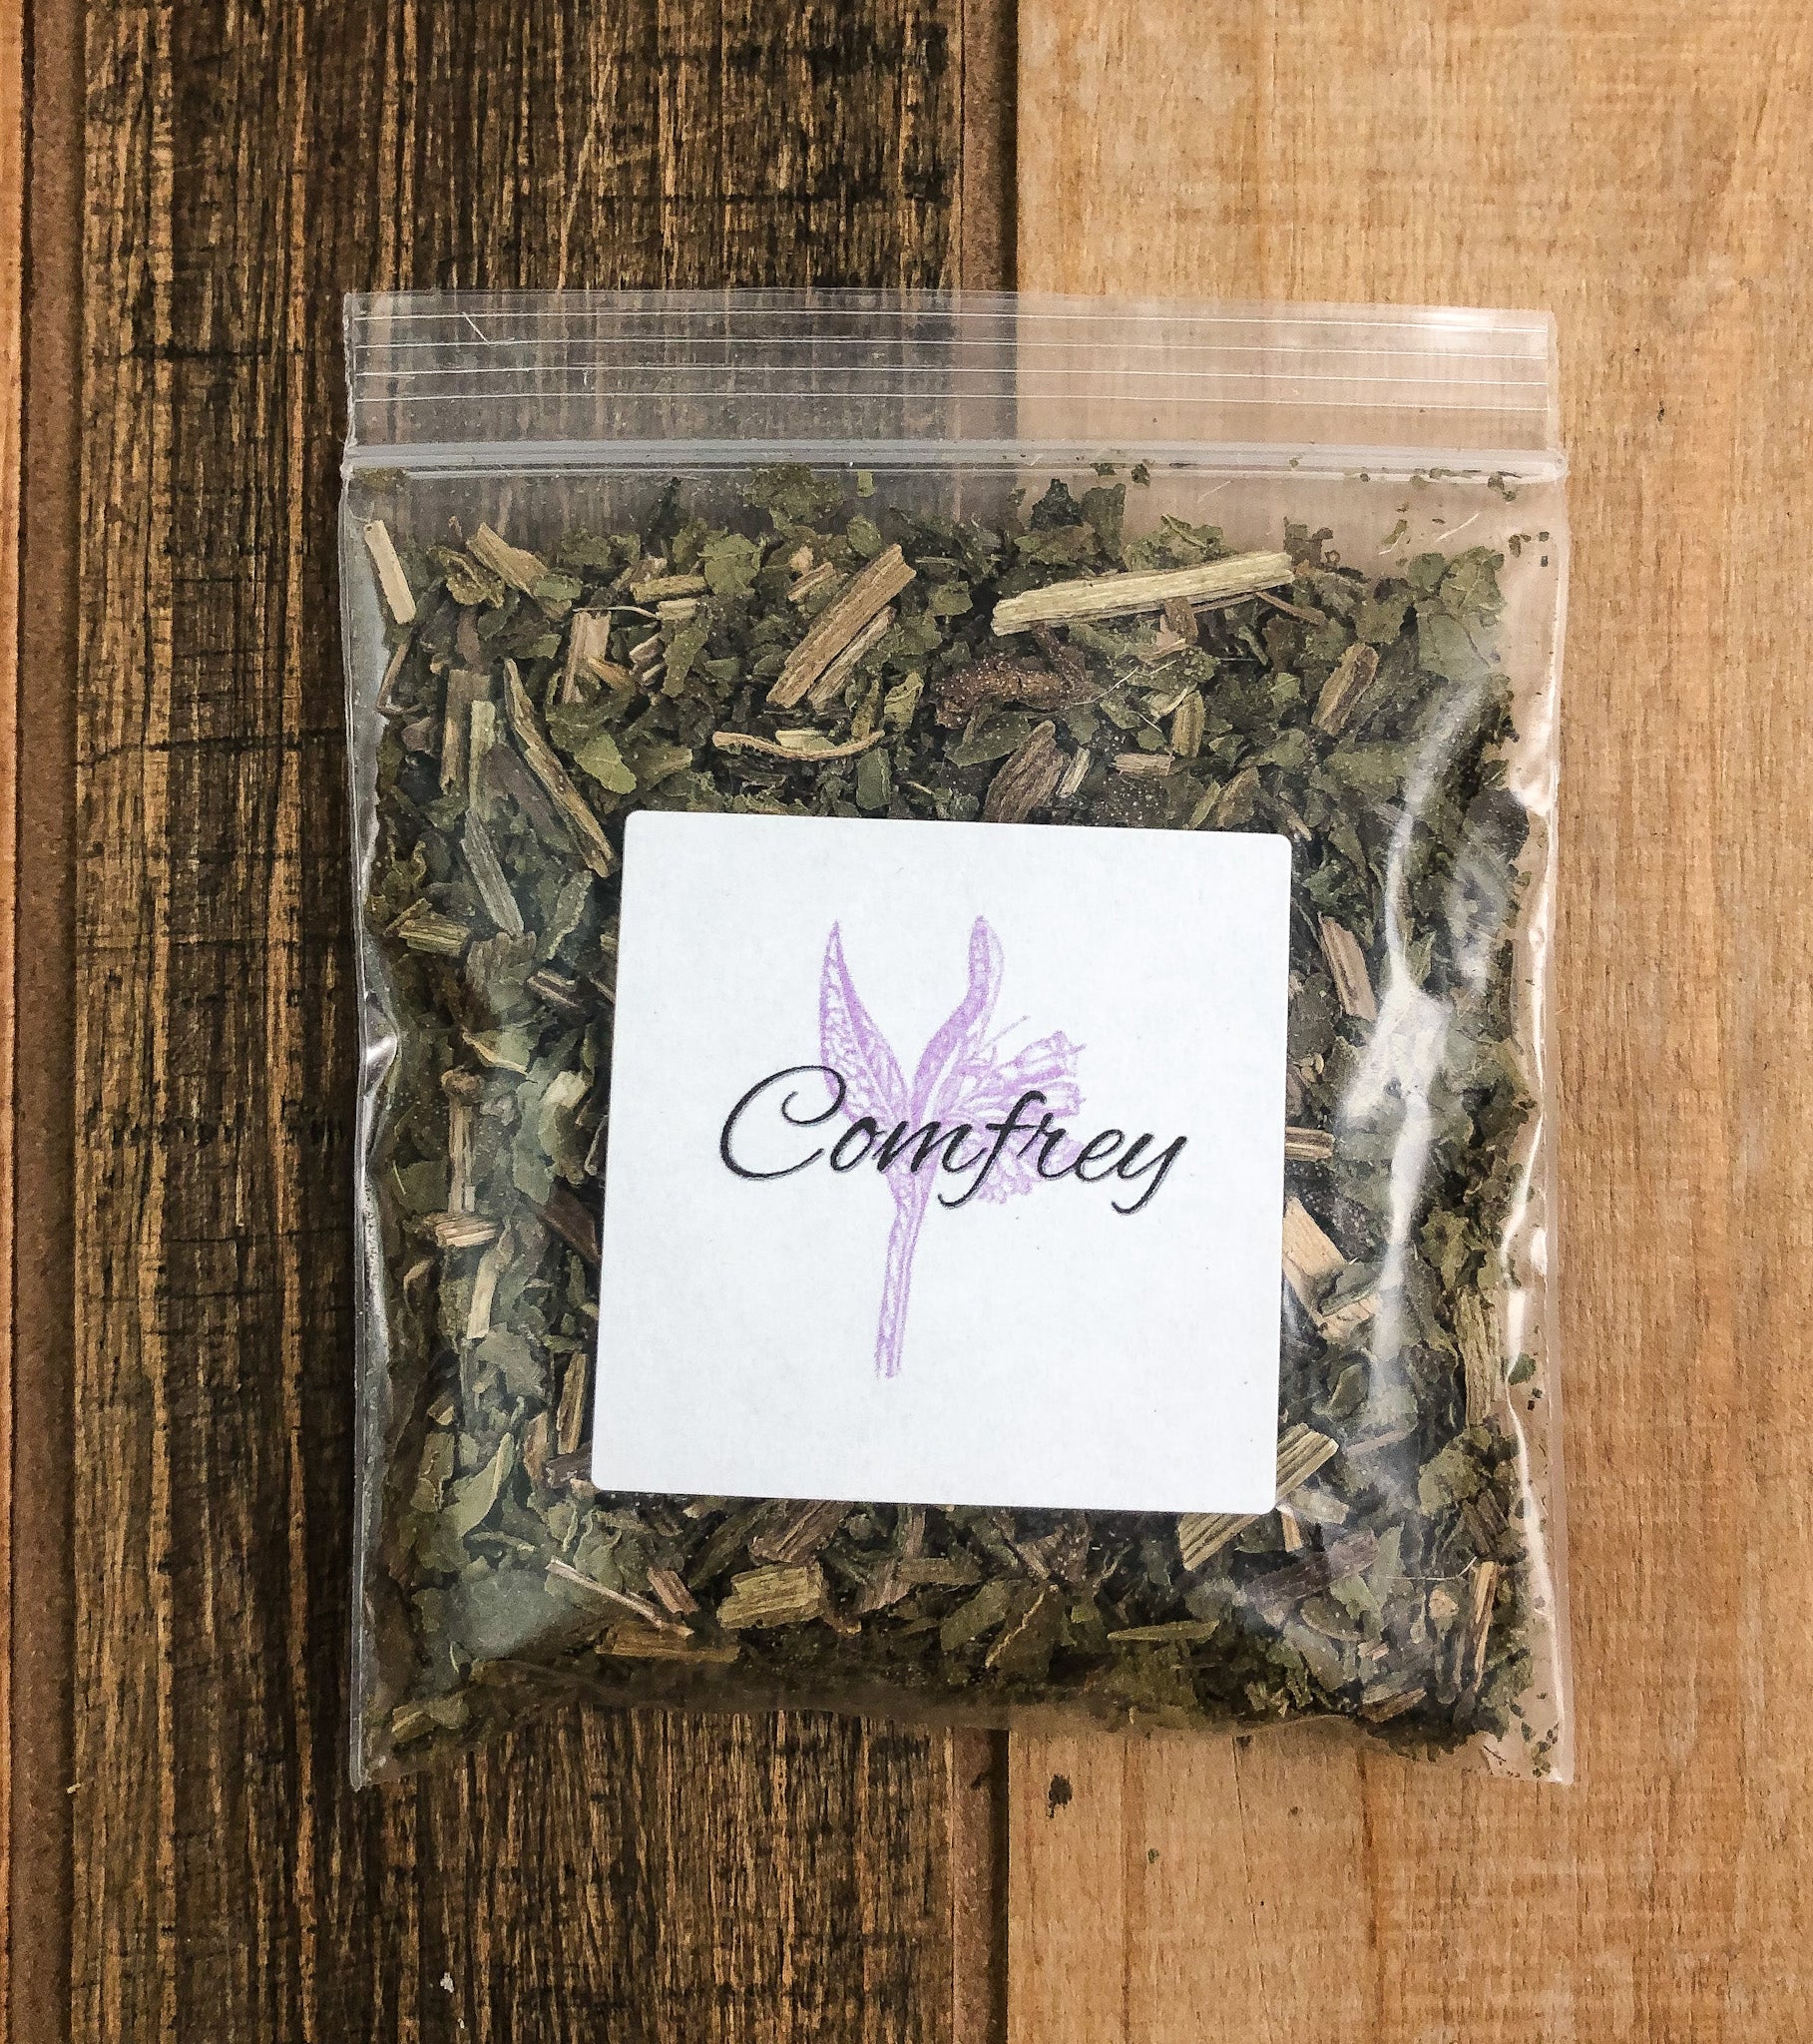 8g bag of dried comfrey in a clear plastic bag with a wooden background